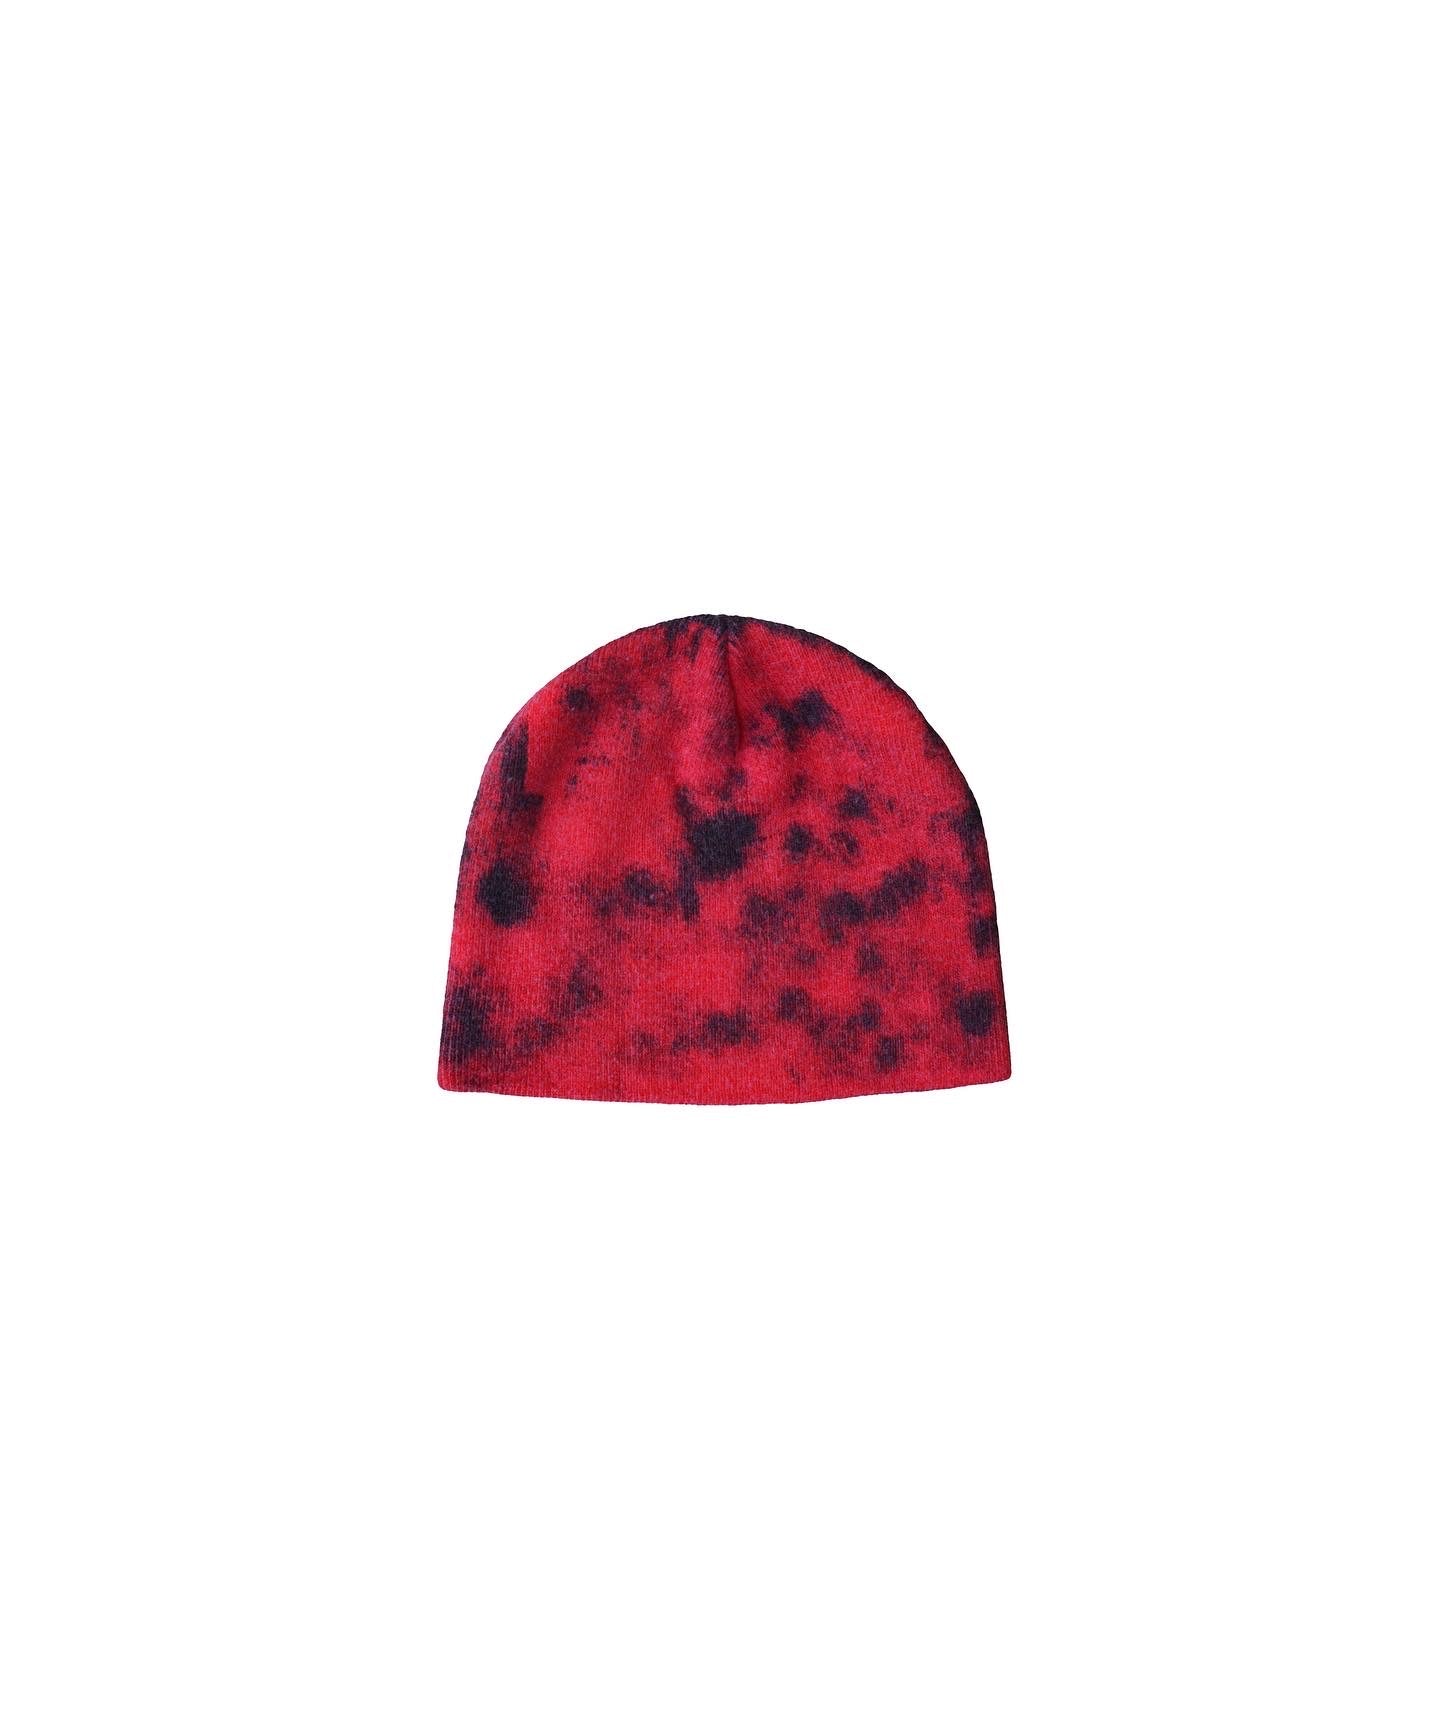 FIRE RED STAINED BEANIE